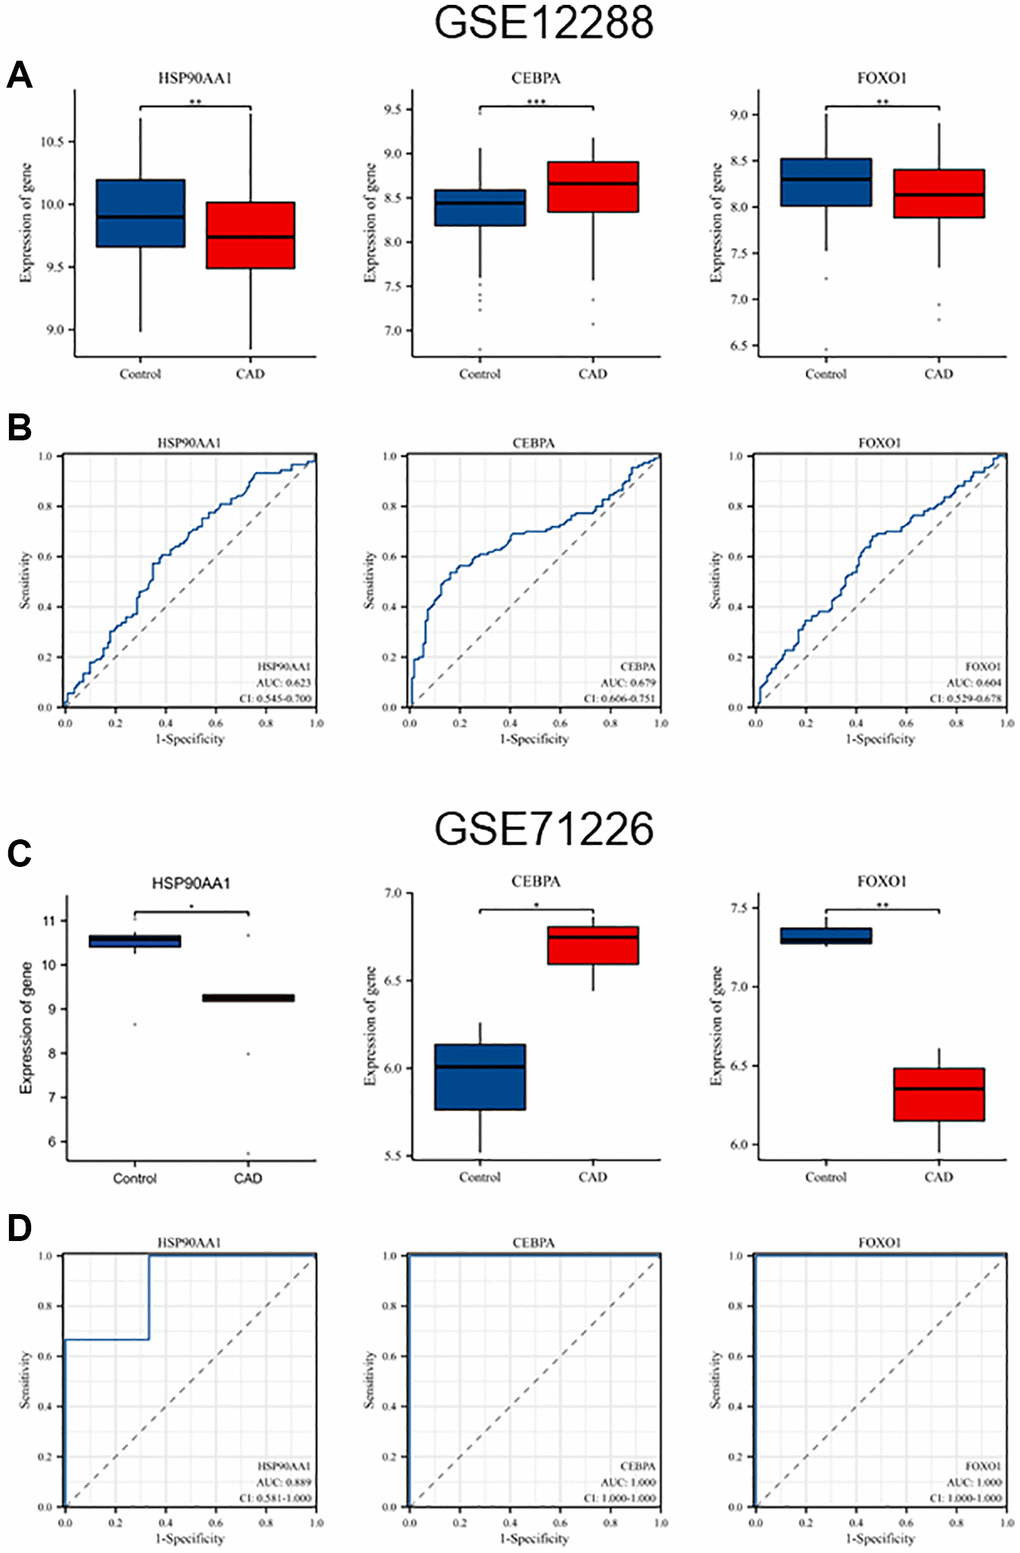 Validation of hub genes expression levels and diagnostic value in GSE12288 and GSE71226 datasets. (A) Differential expression of HSP90AA1, CEBPA, and FOXO1 in GSE12288. (B) ROC curves of HSP90AA1, CEBPA, and FOXO1 in GSE12288. (C) Differential expression of HSP90AA1, CEBPA, and FOXO1 in GSE71226. (D) ROC curves of HSP90AA1, CEBPA, and FOXO1 in GSE71226.